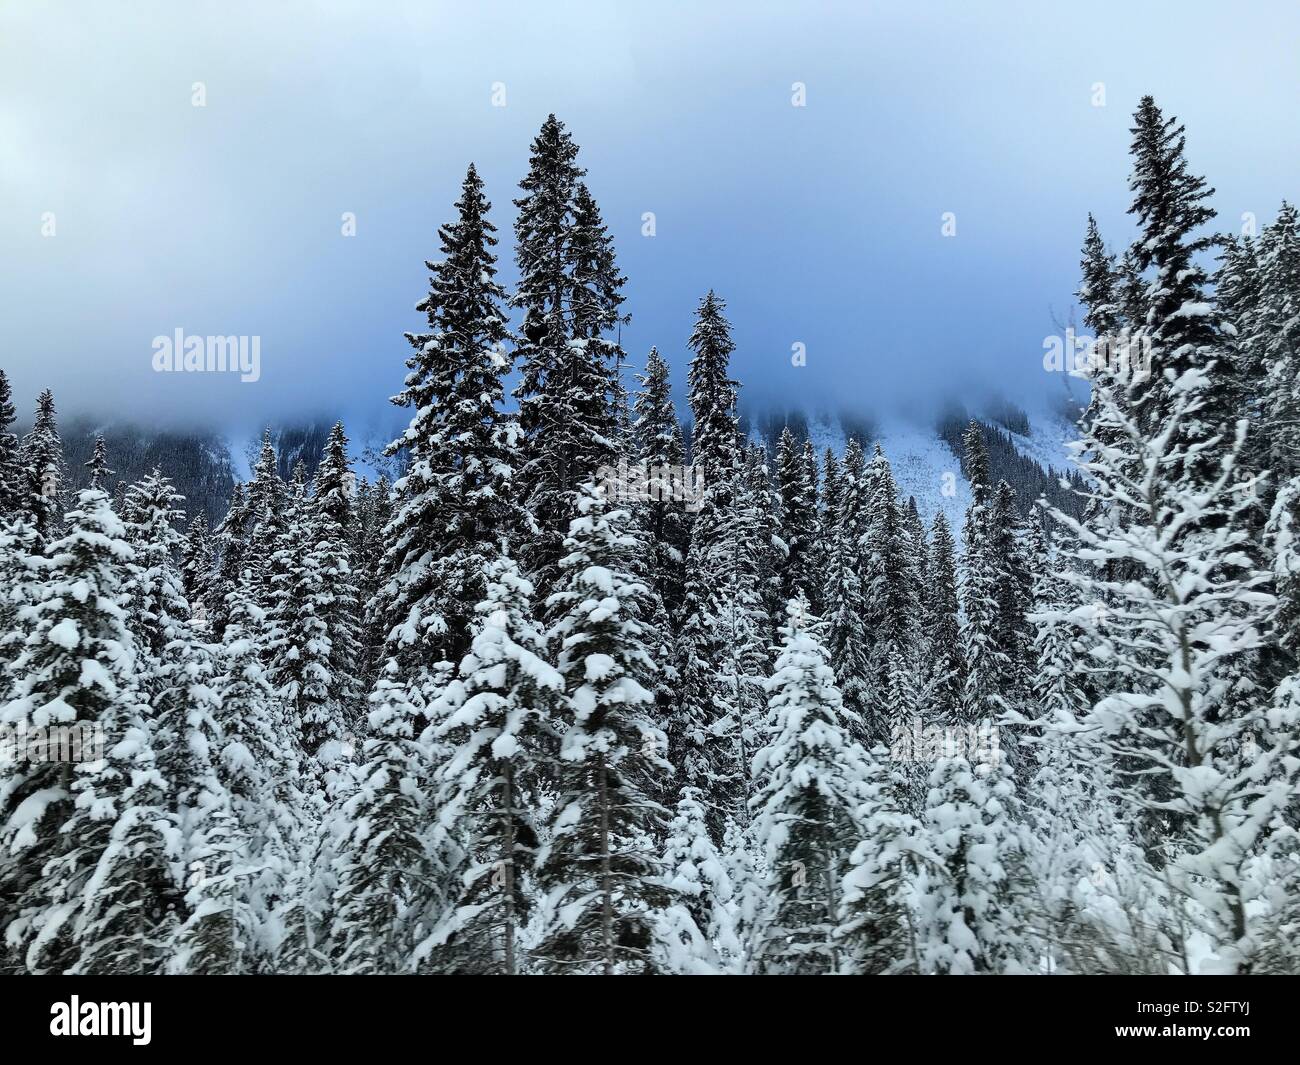 Icy blue clouds shroud mountains behind snow-covered spruce trees. Stock Photo